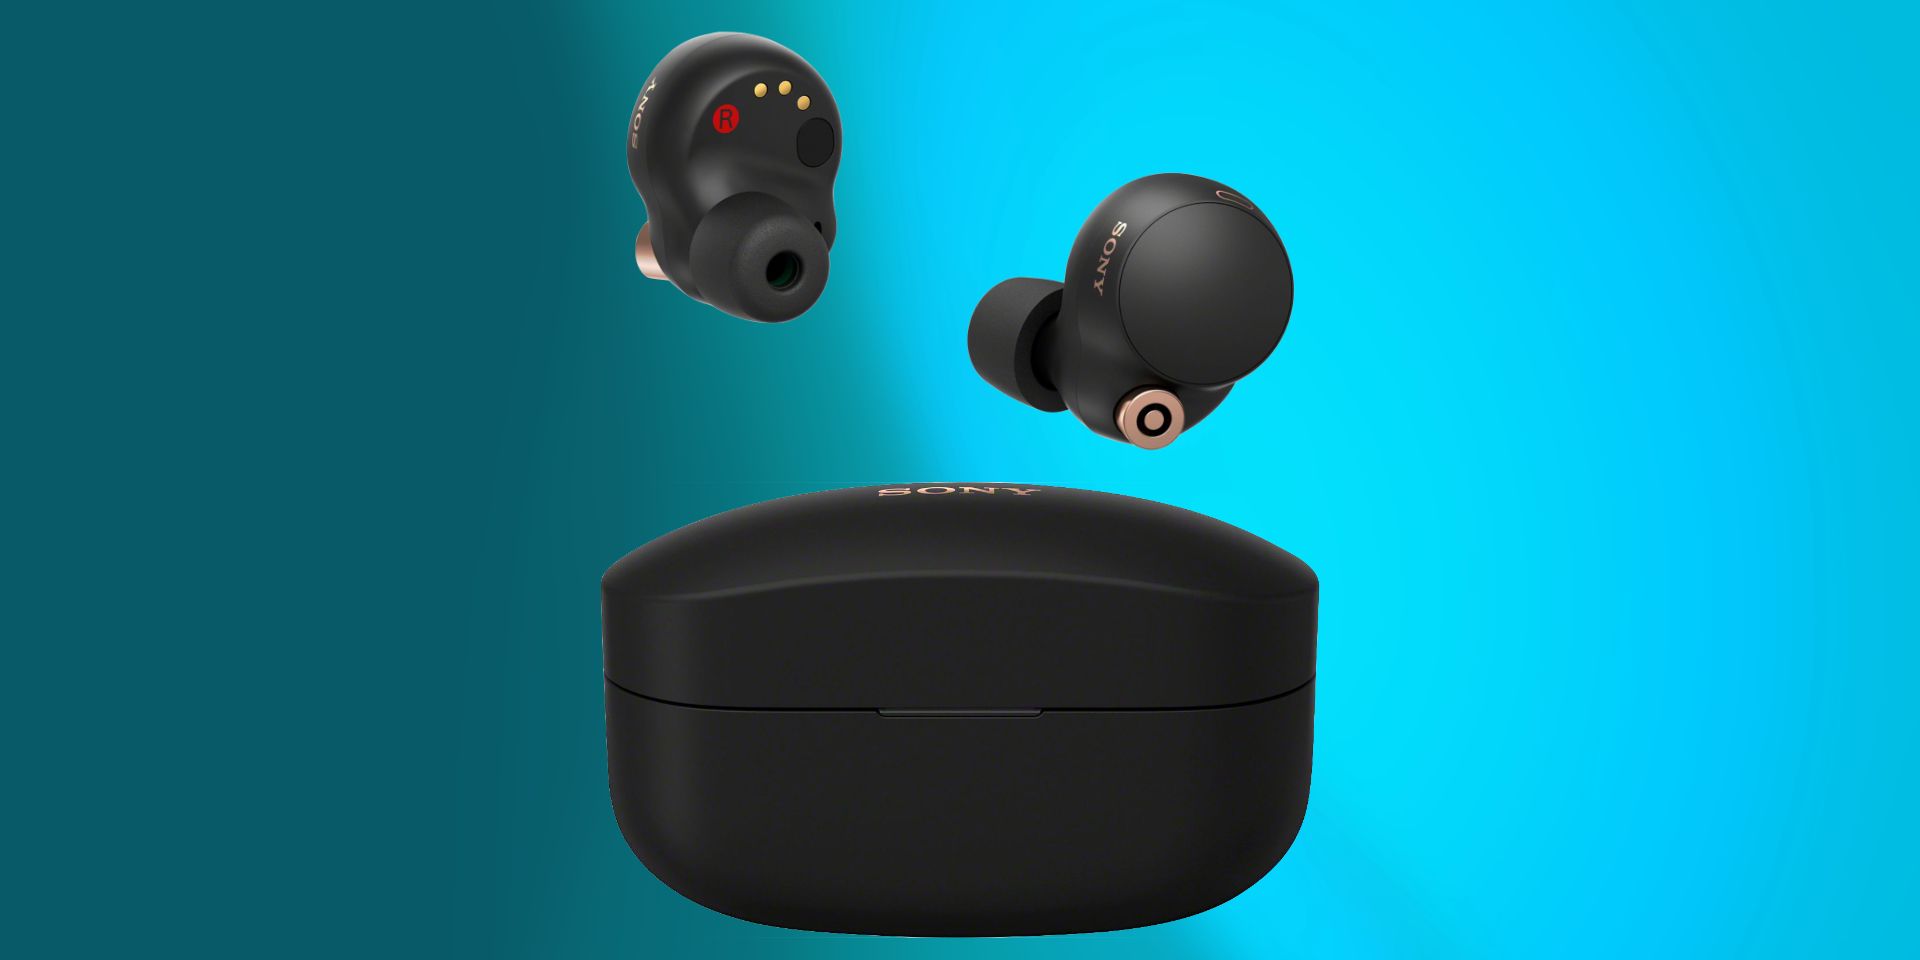 WF-1000XM4 Earbuds News & Updates: Everything We Know